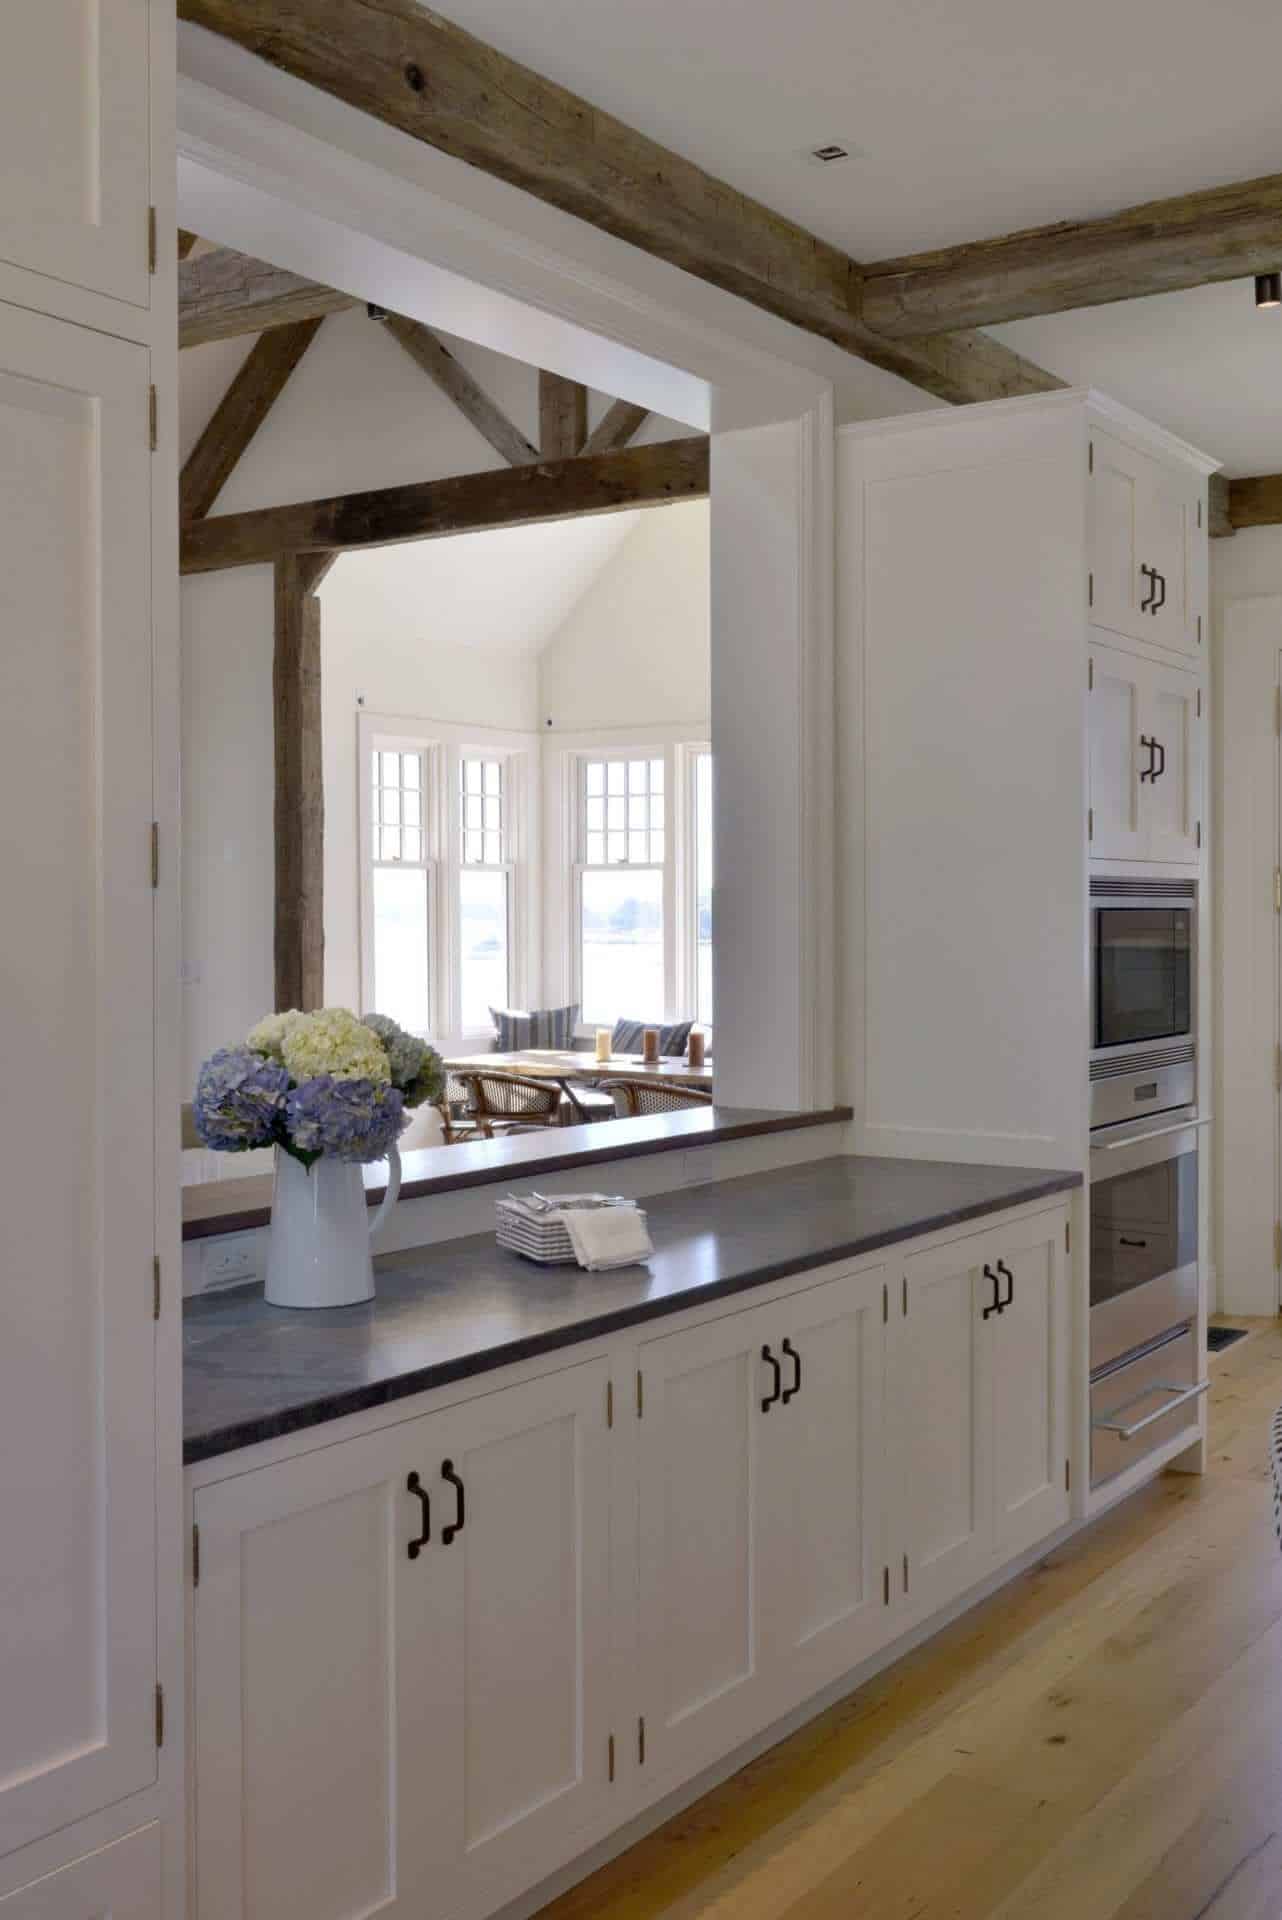 Classic kitchen features Jet Mist granite topped white Bilotta cabinetry and oak flooring.